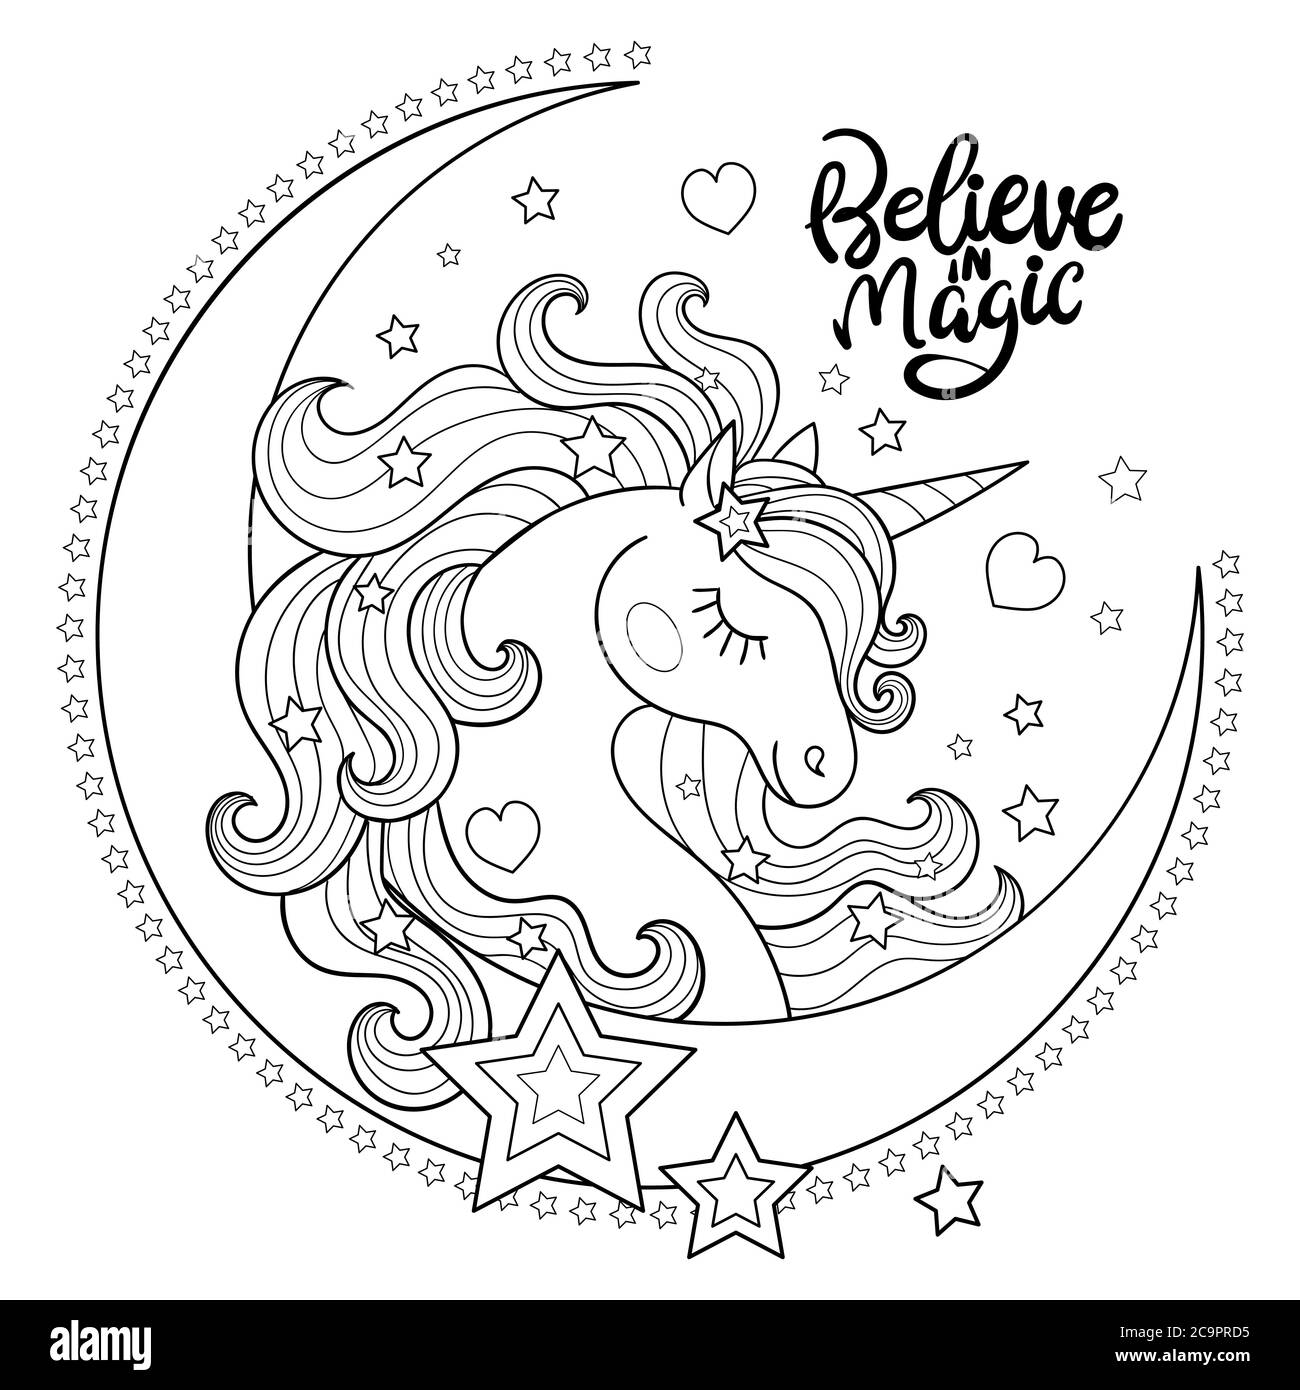 Believe in magic. Beautiful unicorn with the moon. Fantasy animal black and white illustration. For coloring books, prints, posters, cards, stickers, Stock Vector